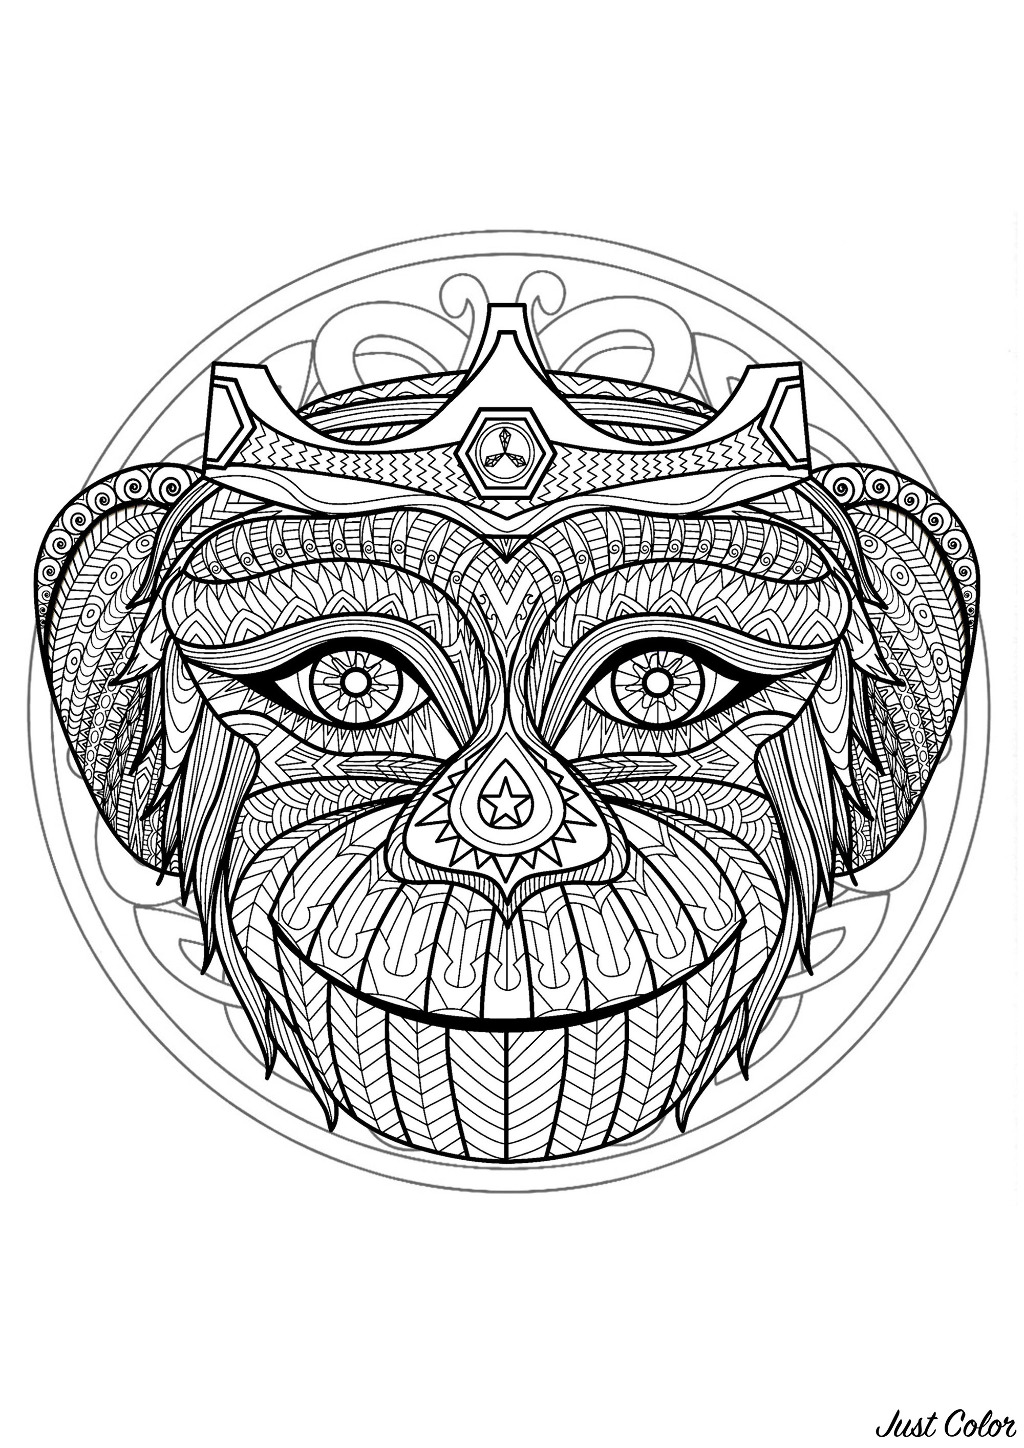 Monkey head in a difficult Mandala. Prepare your pens and pencils to color this Mandala full of small details and intricate areas. Feel free to let your instincts decide where to color, and what colors to choose.